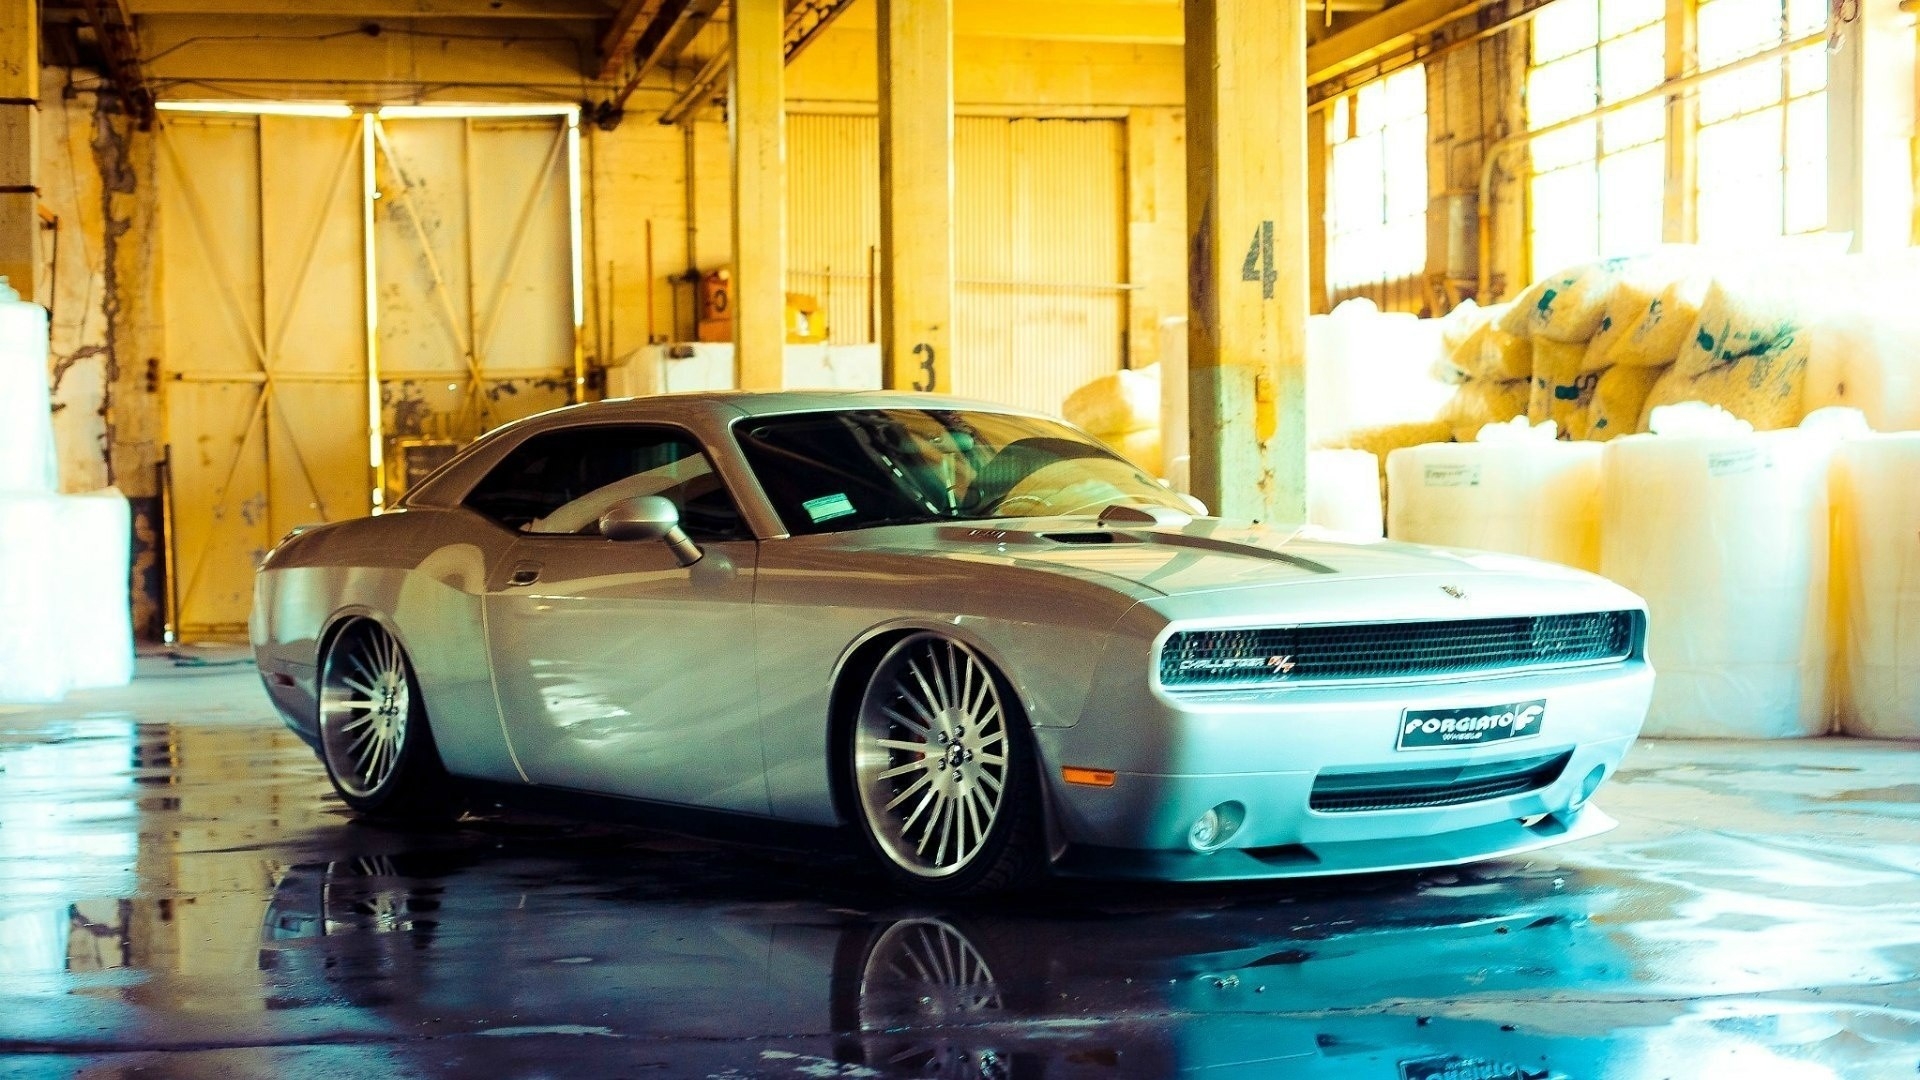 american, Muscle, Cars, Dodge, Challenger Wallpaper